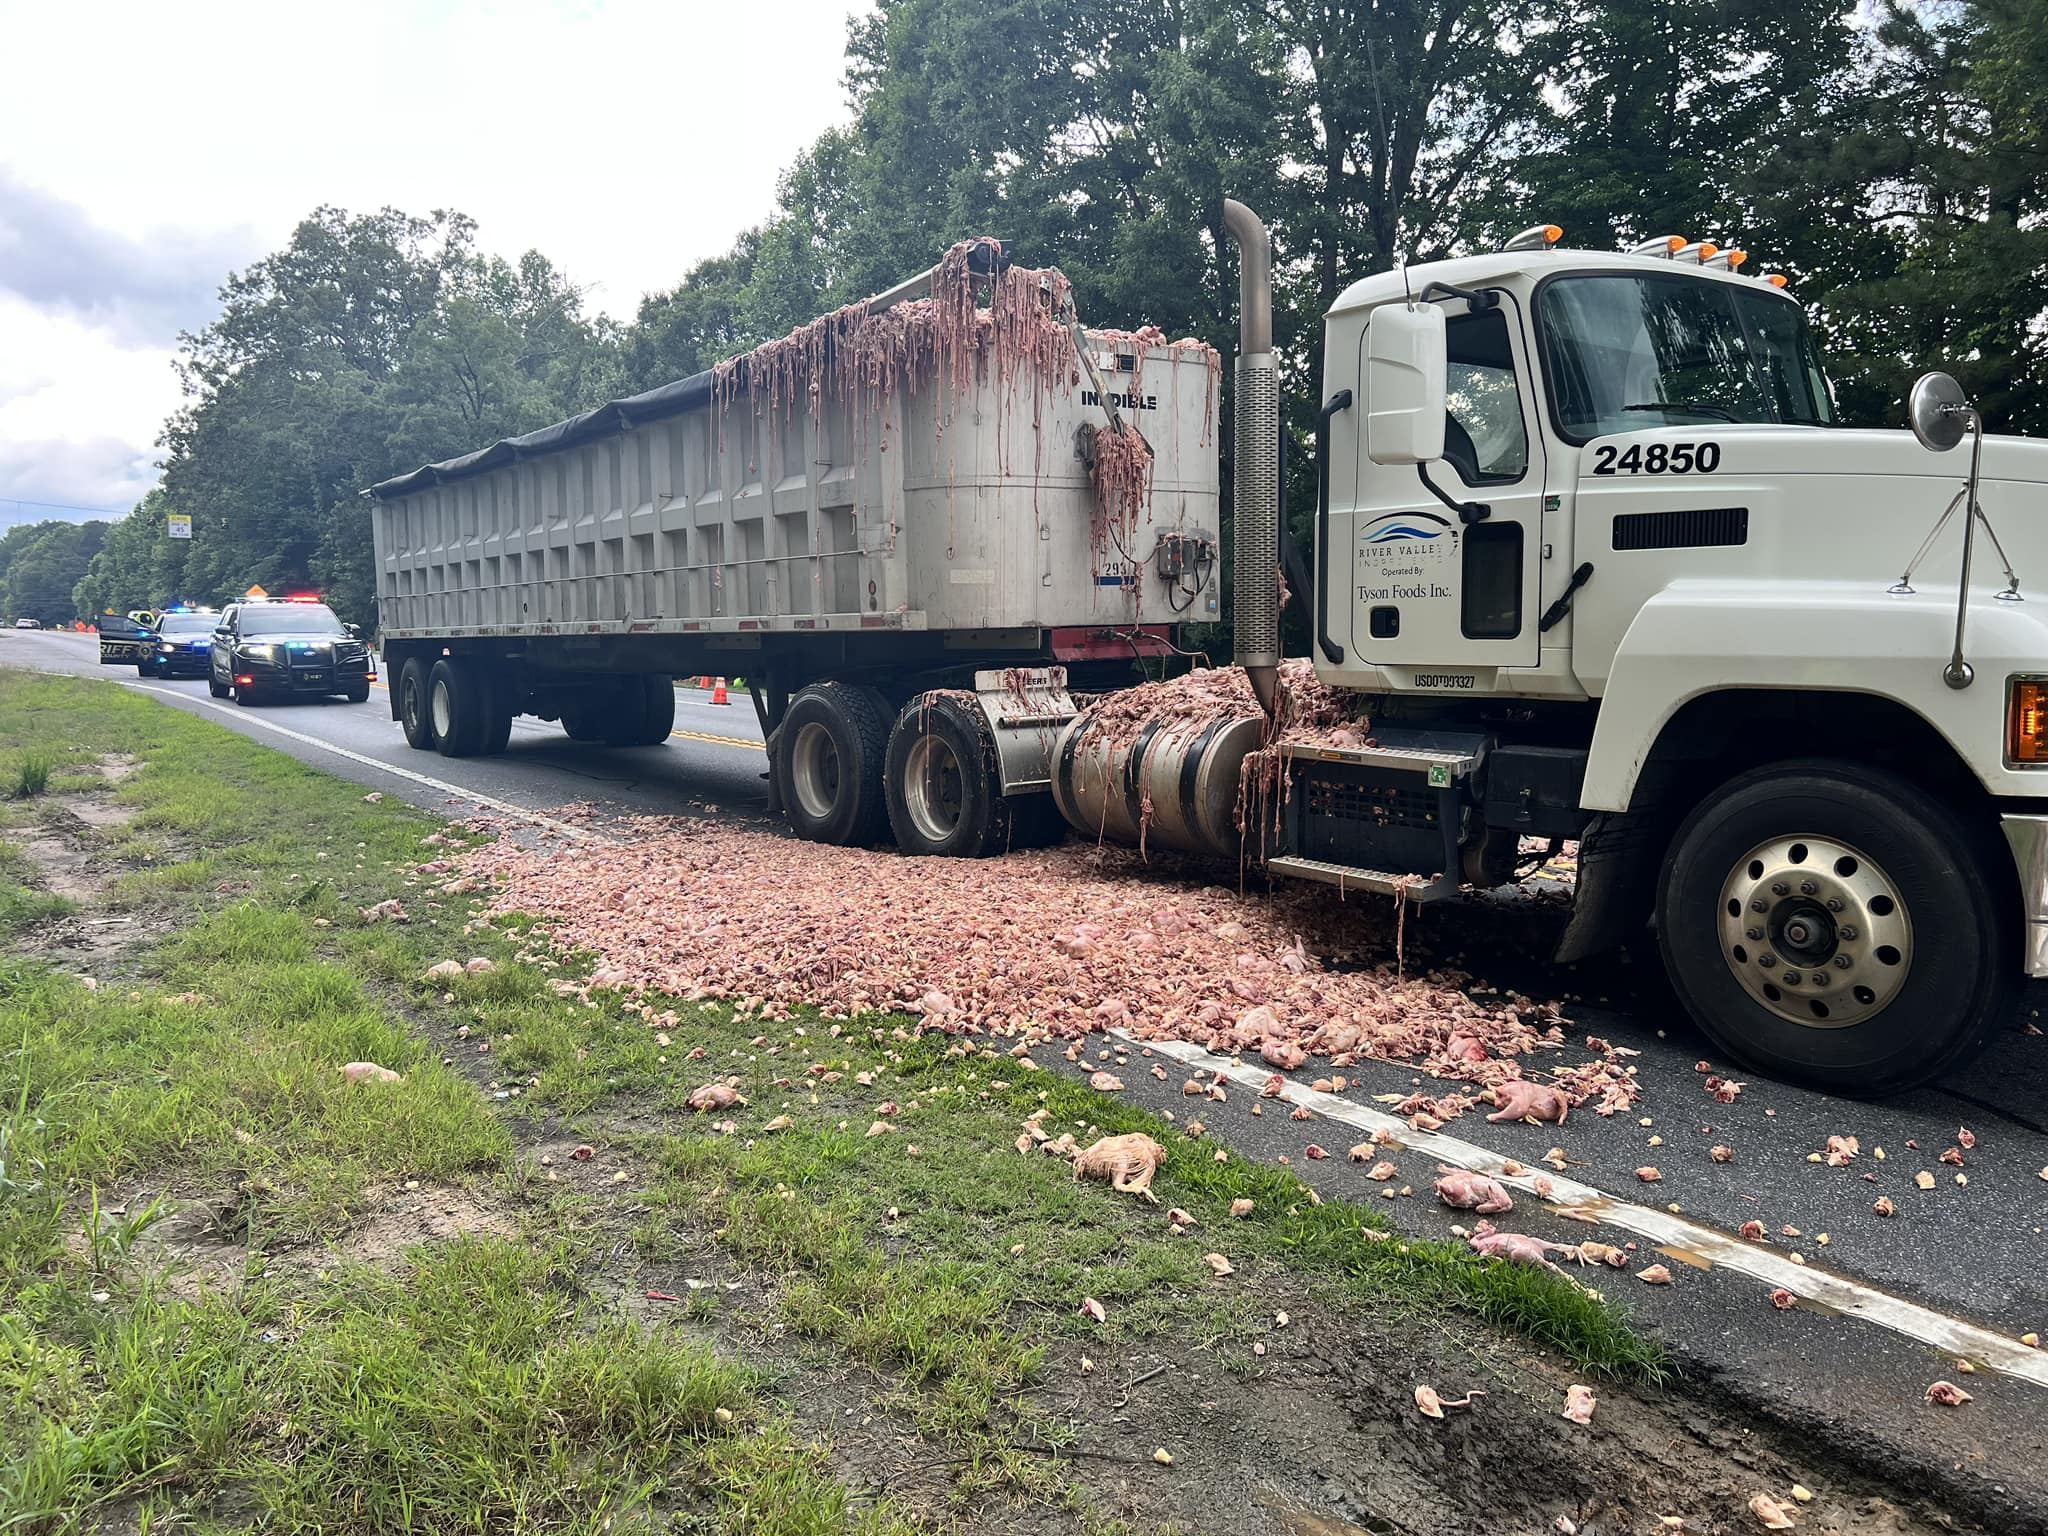 Poultry in Motion: Chaos ensues as truckload of chicken parts spills on Georgia highway